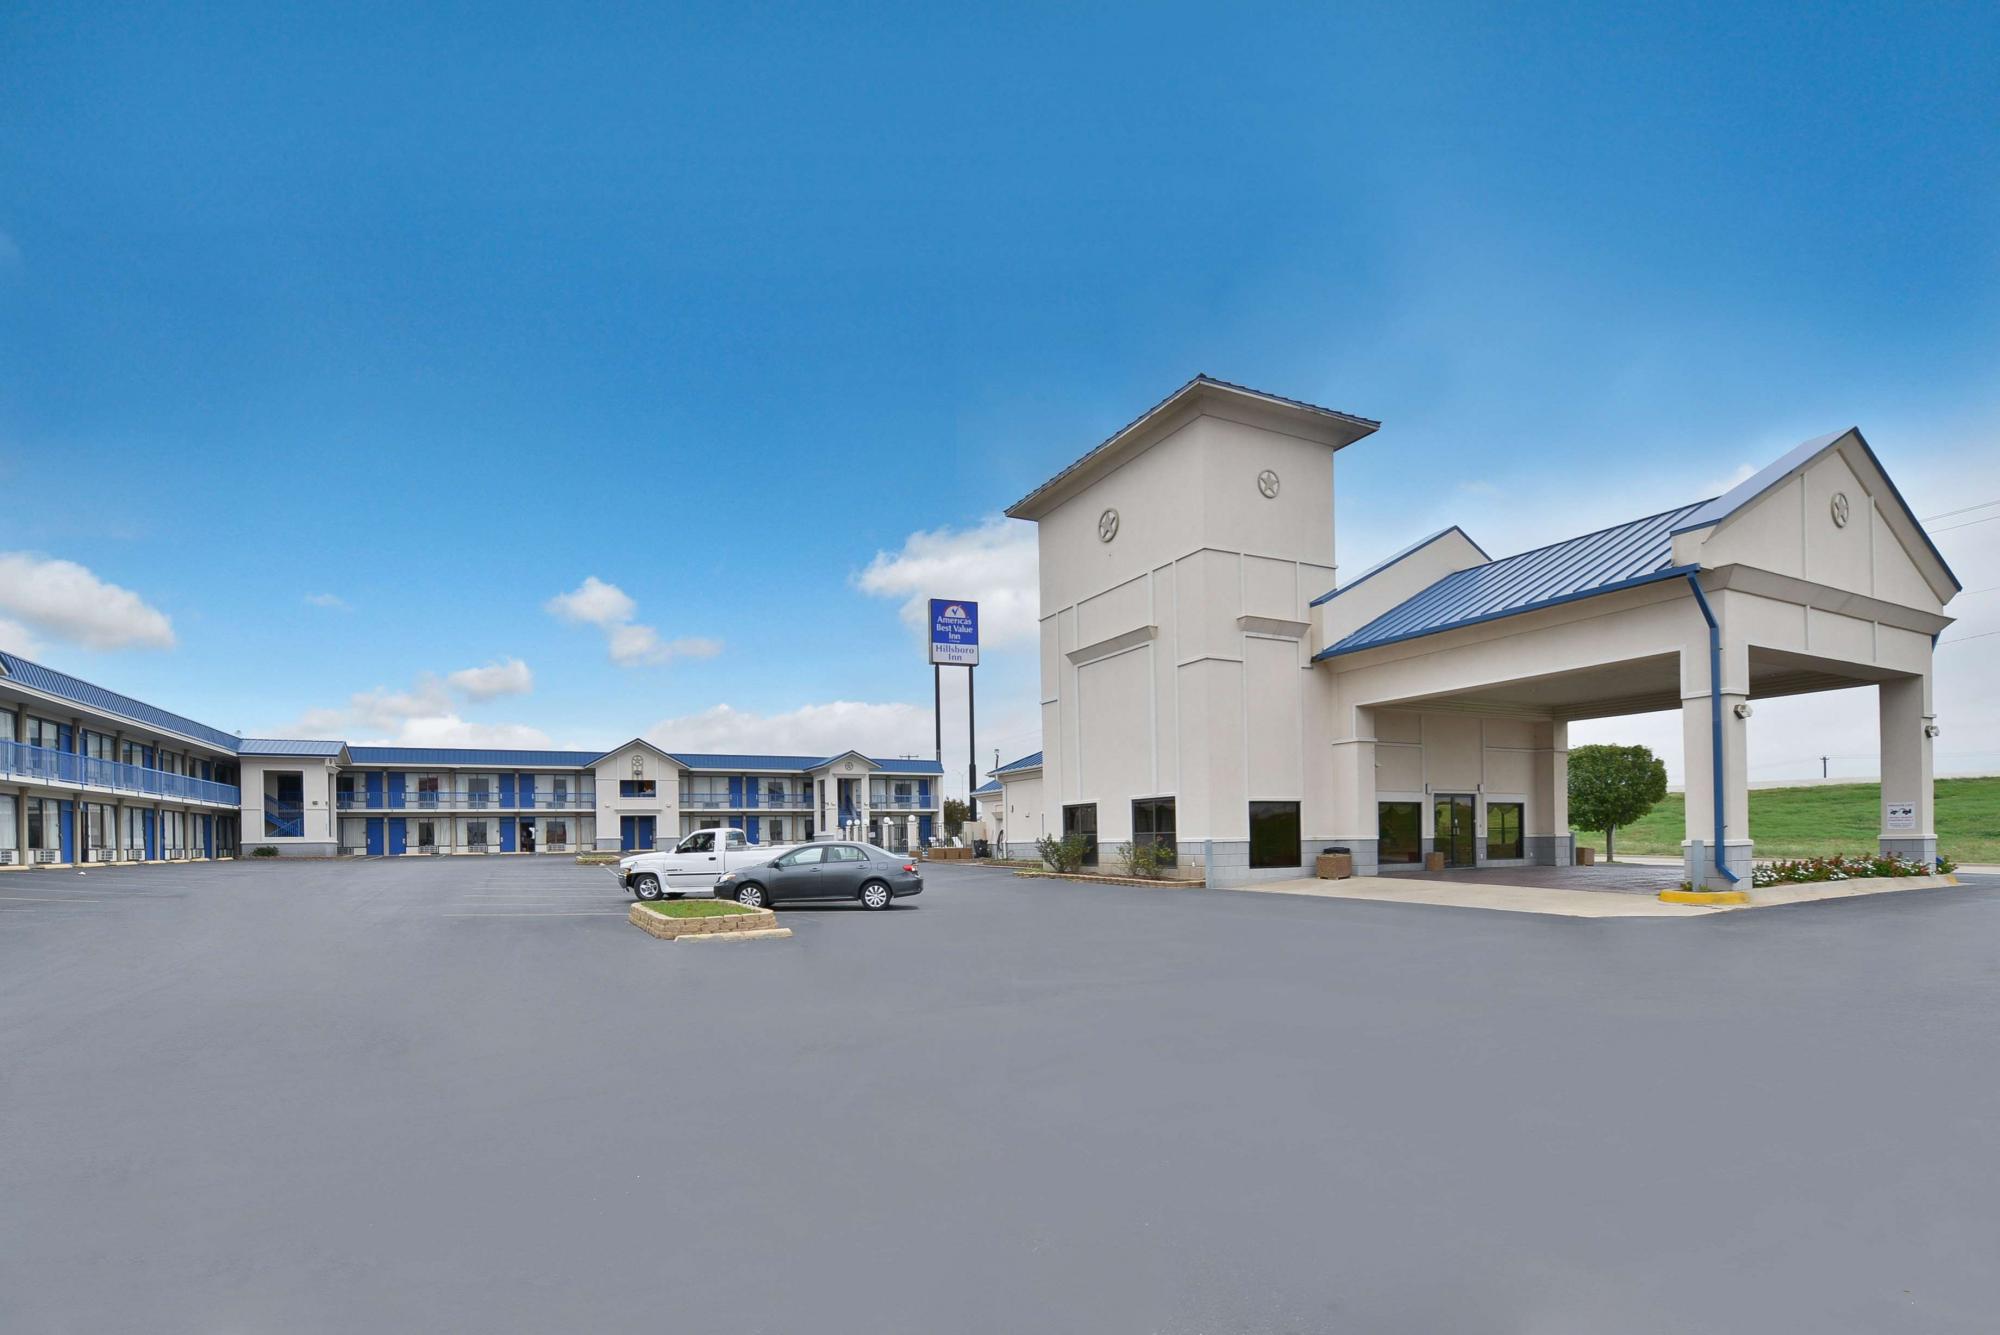 Parking lot view of hotel exterior with ample parking